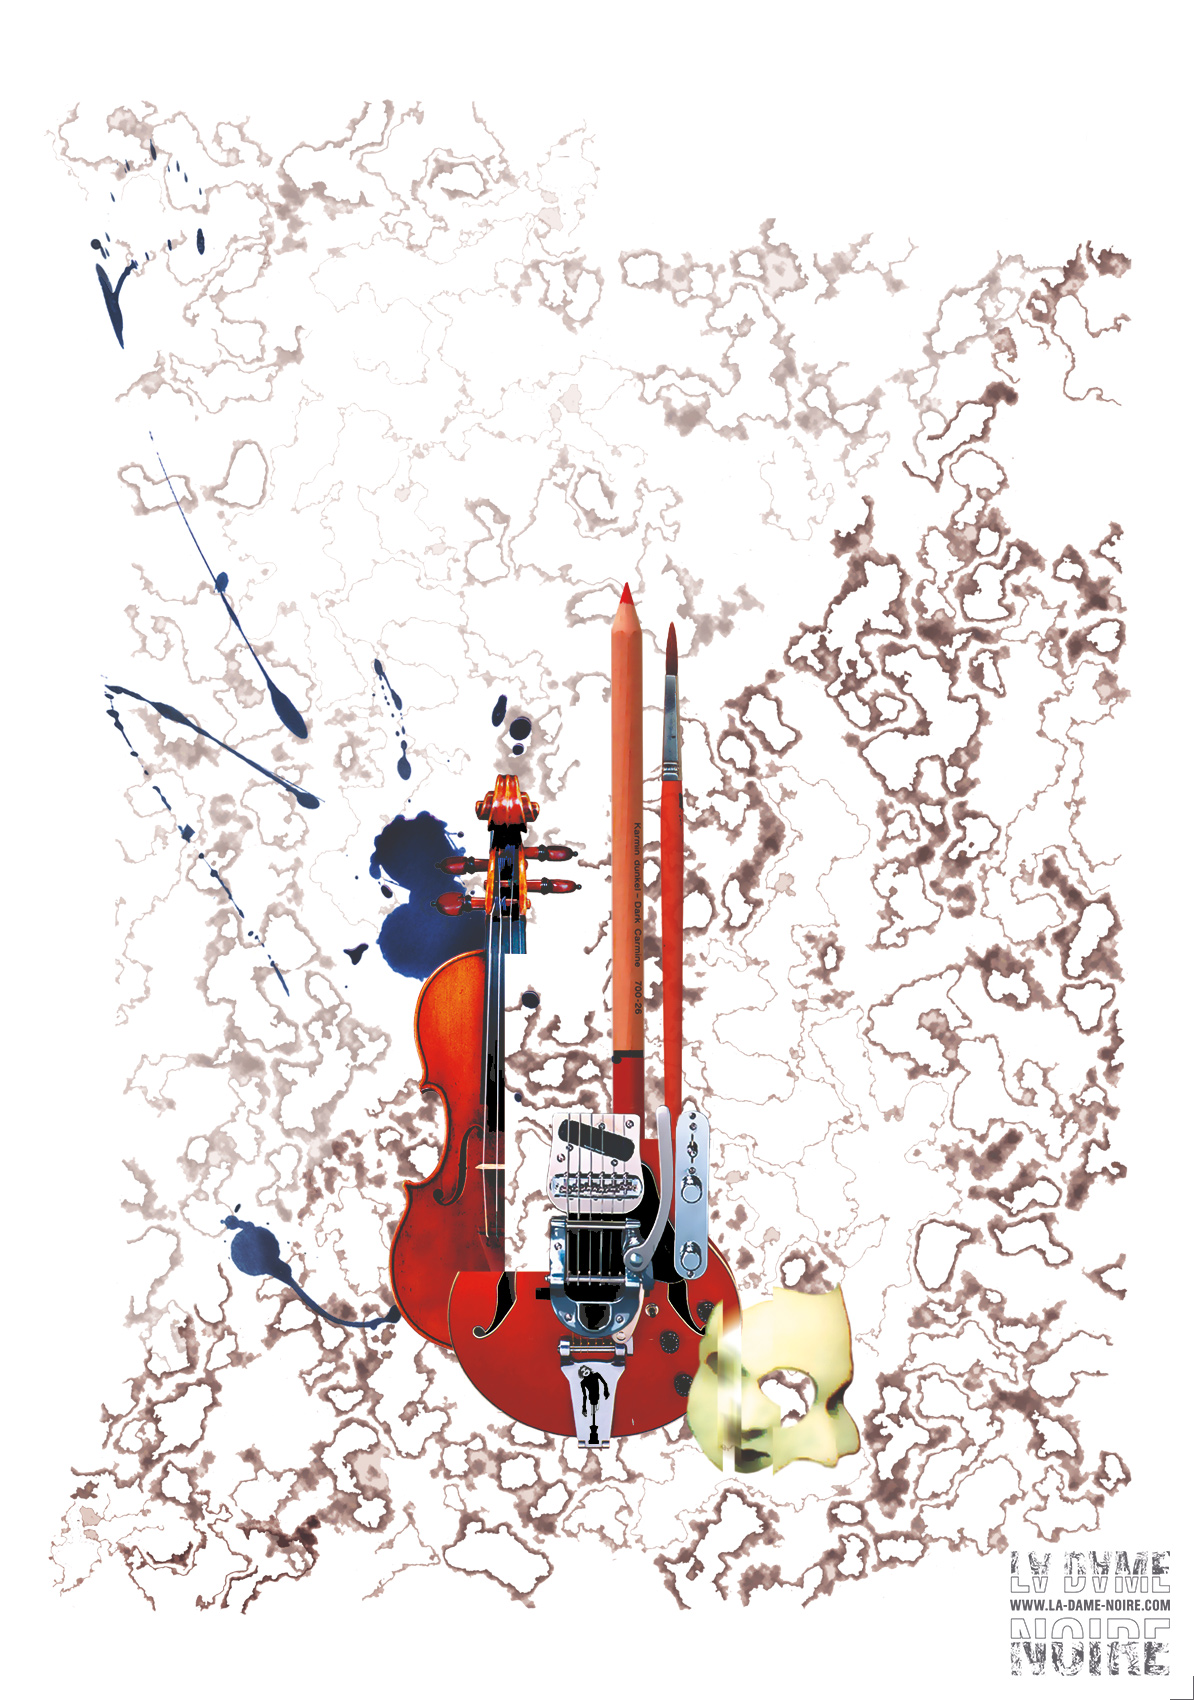 Graphic Artwork with a violin, a guitare, a mask, a brush and pencil